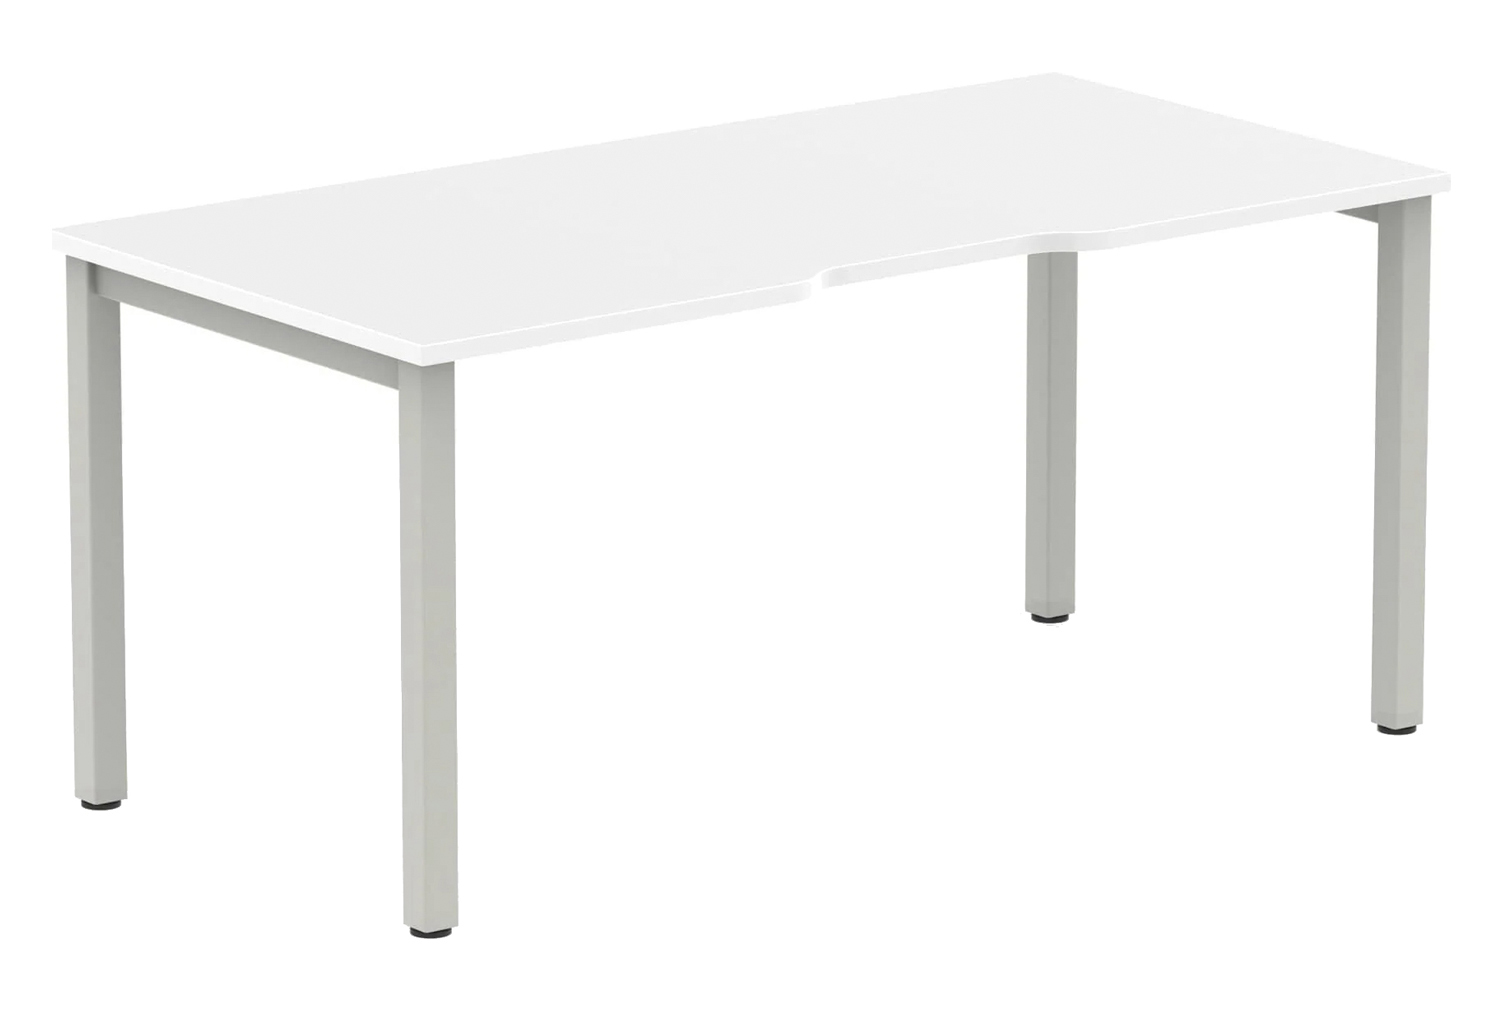 Pamola Single Bench Office Desk (Silver Legs), 160wx80dx73h (cm), White, Express Delivery